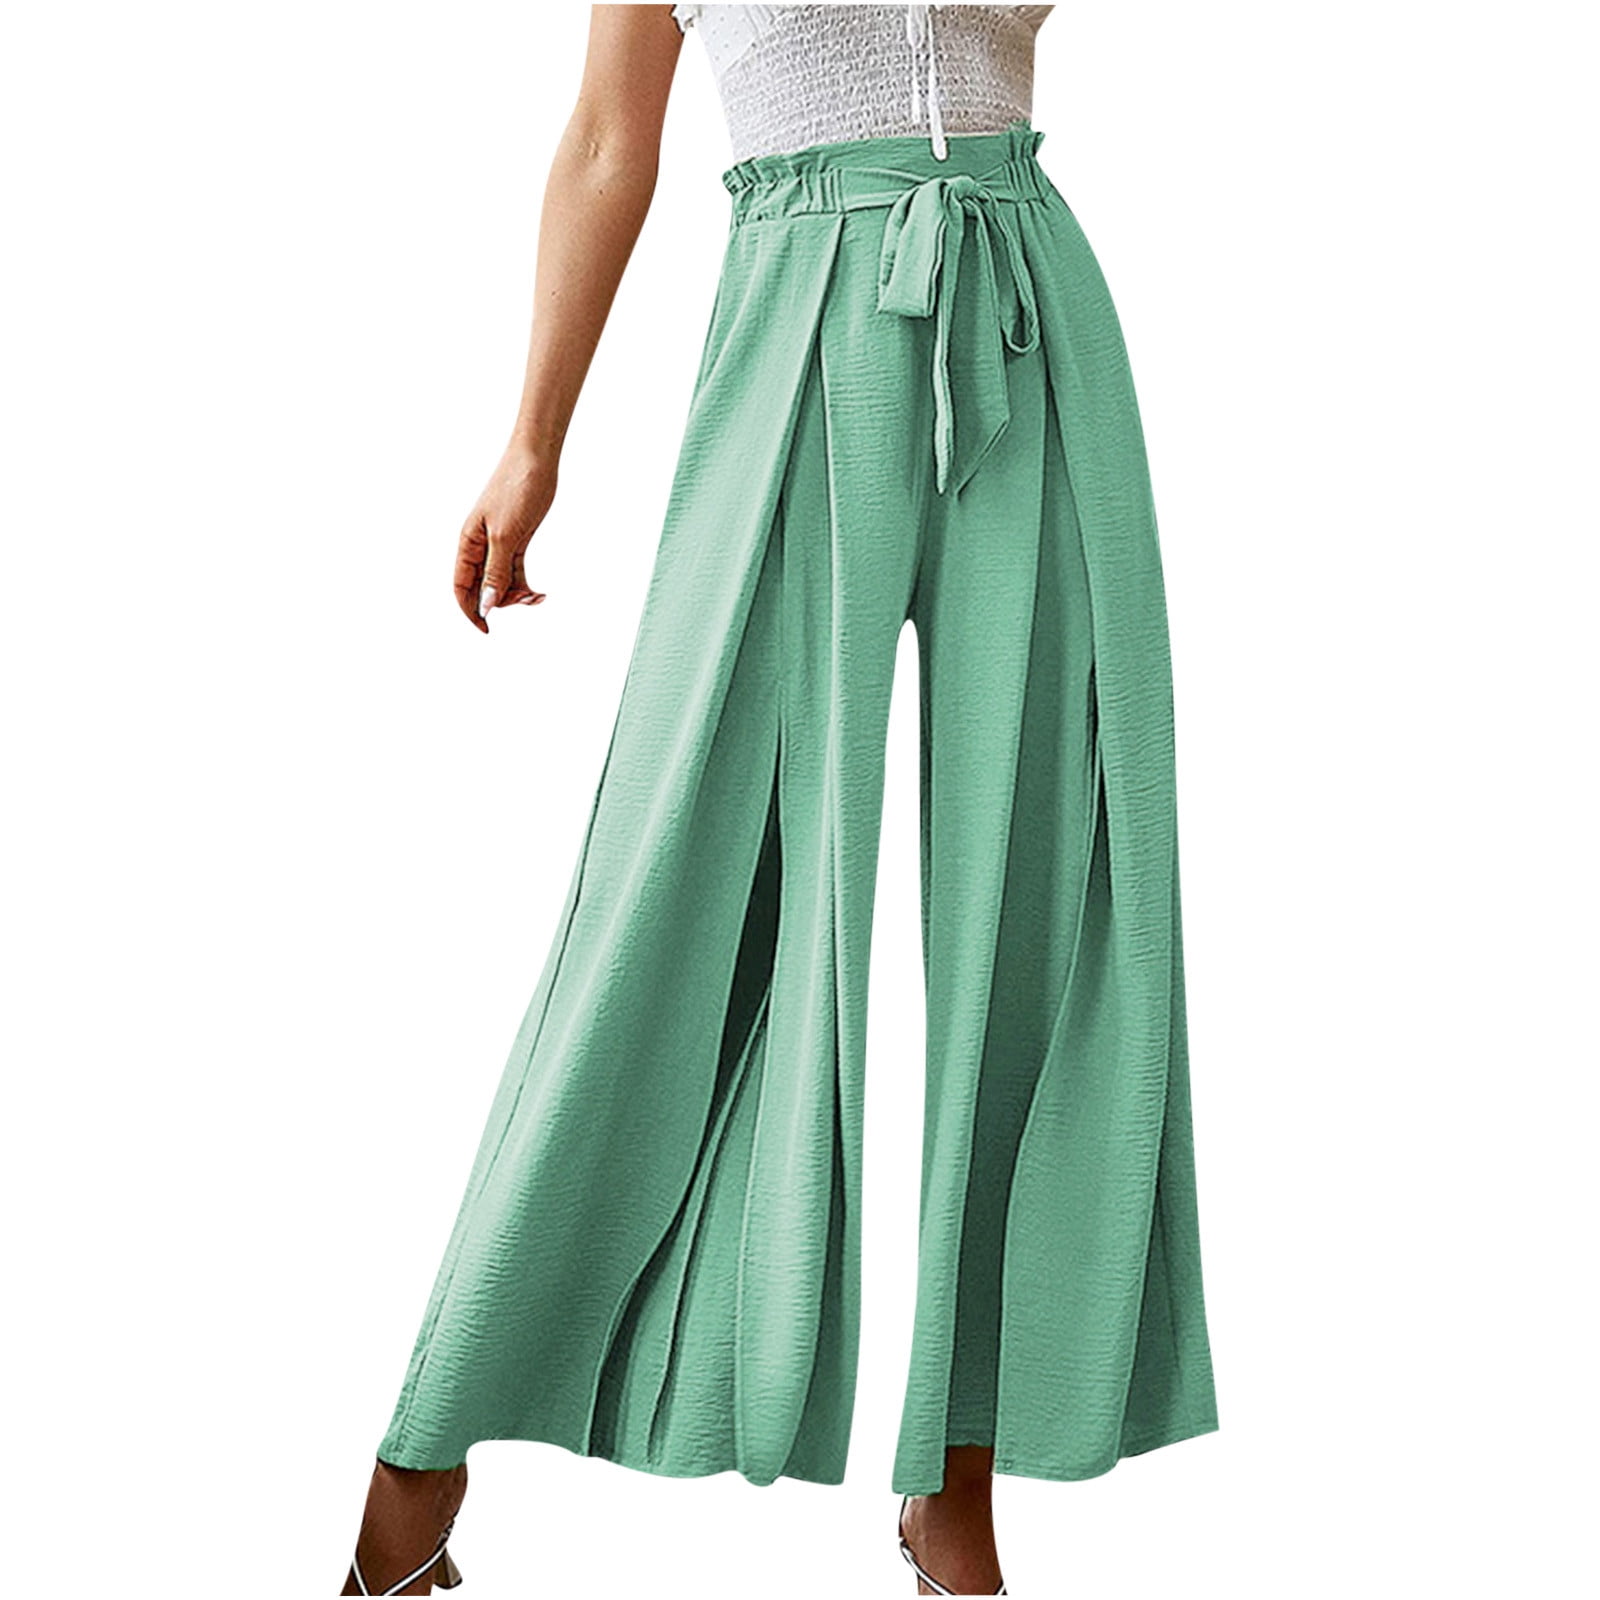 SSAAVKUY Womens Fashion Summer Casual Solid Chiffon Pockets Elastic Waist  Full Length Long Pants Double Layer Crinkle Wide Leg Pants Trousers Flare  Trousers Yellow 12 